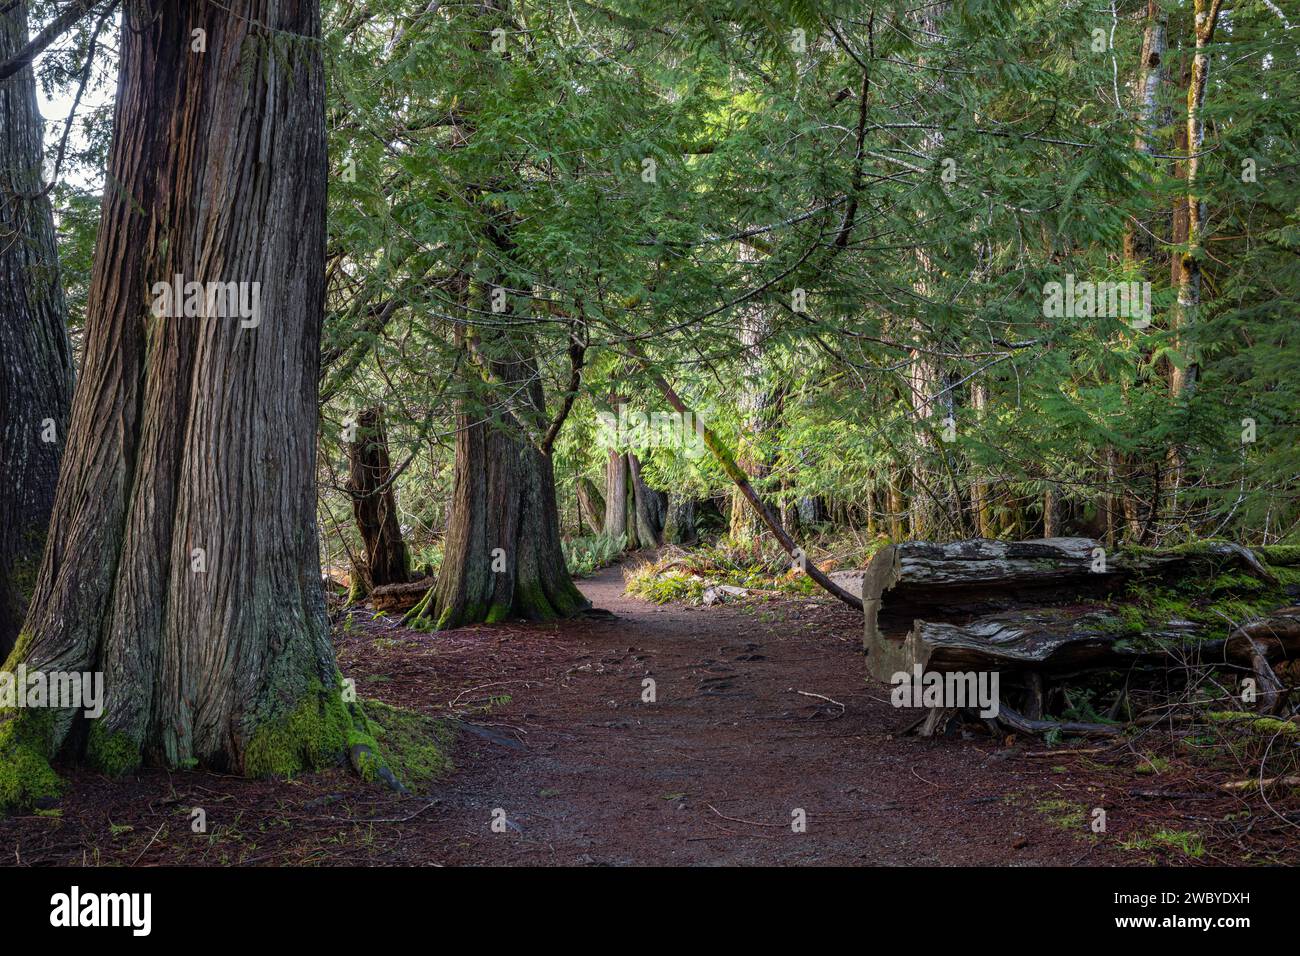 WA23914-00...WASHINGTON - Old growth forest along the shore of Lake Crescent viewed from the Moments in Time Trail. Stock Photo